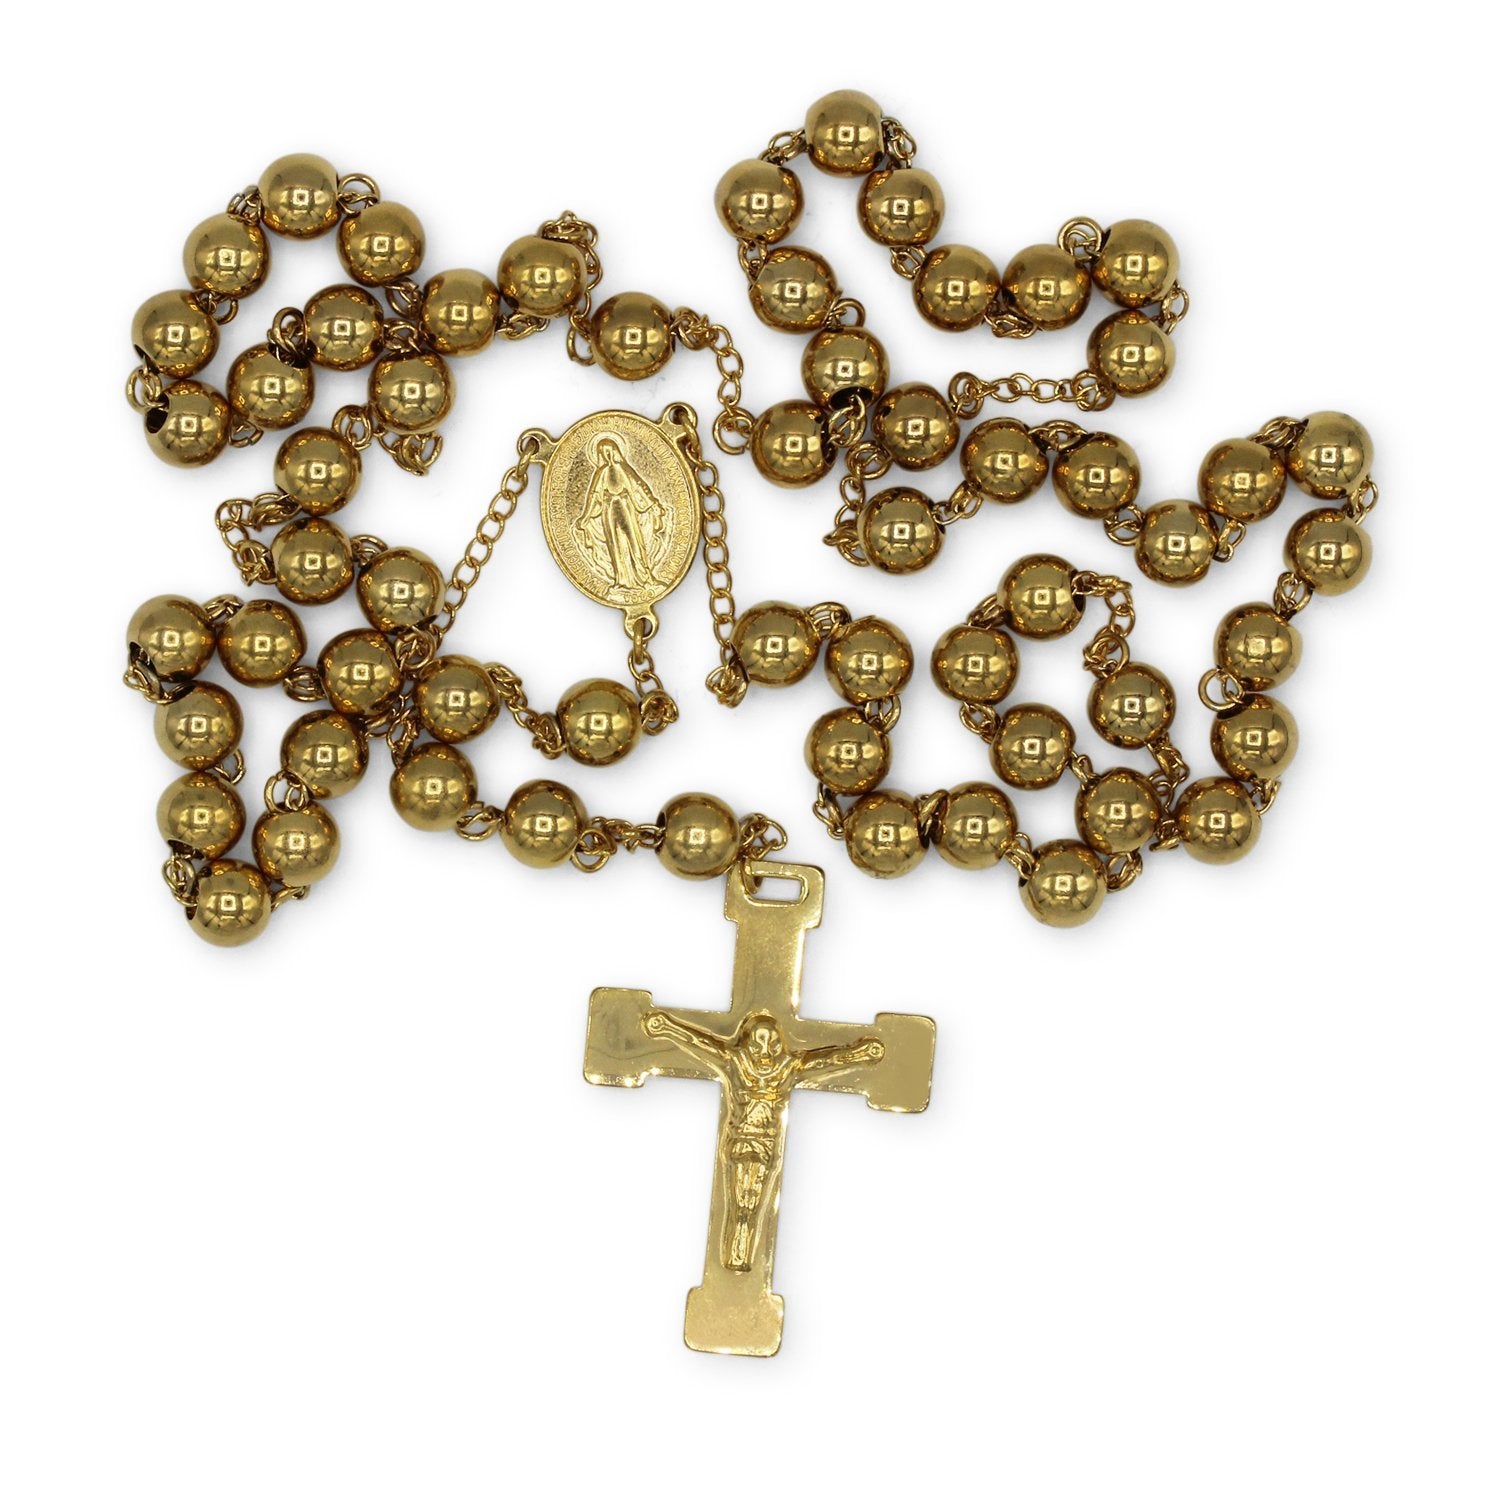 Traditional Gold Rosary Necklace Five Decade Catholic Prayer Beads 8mm